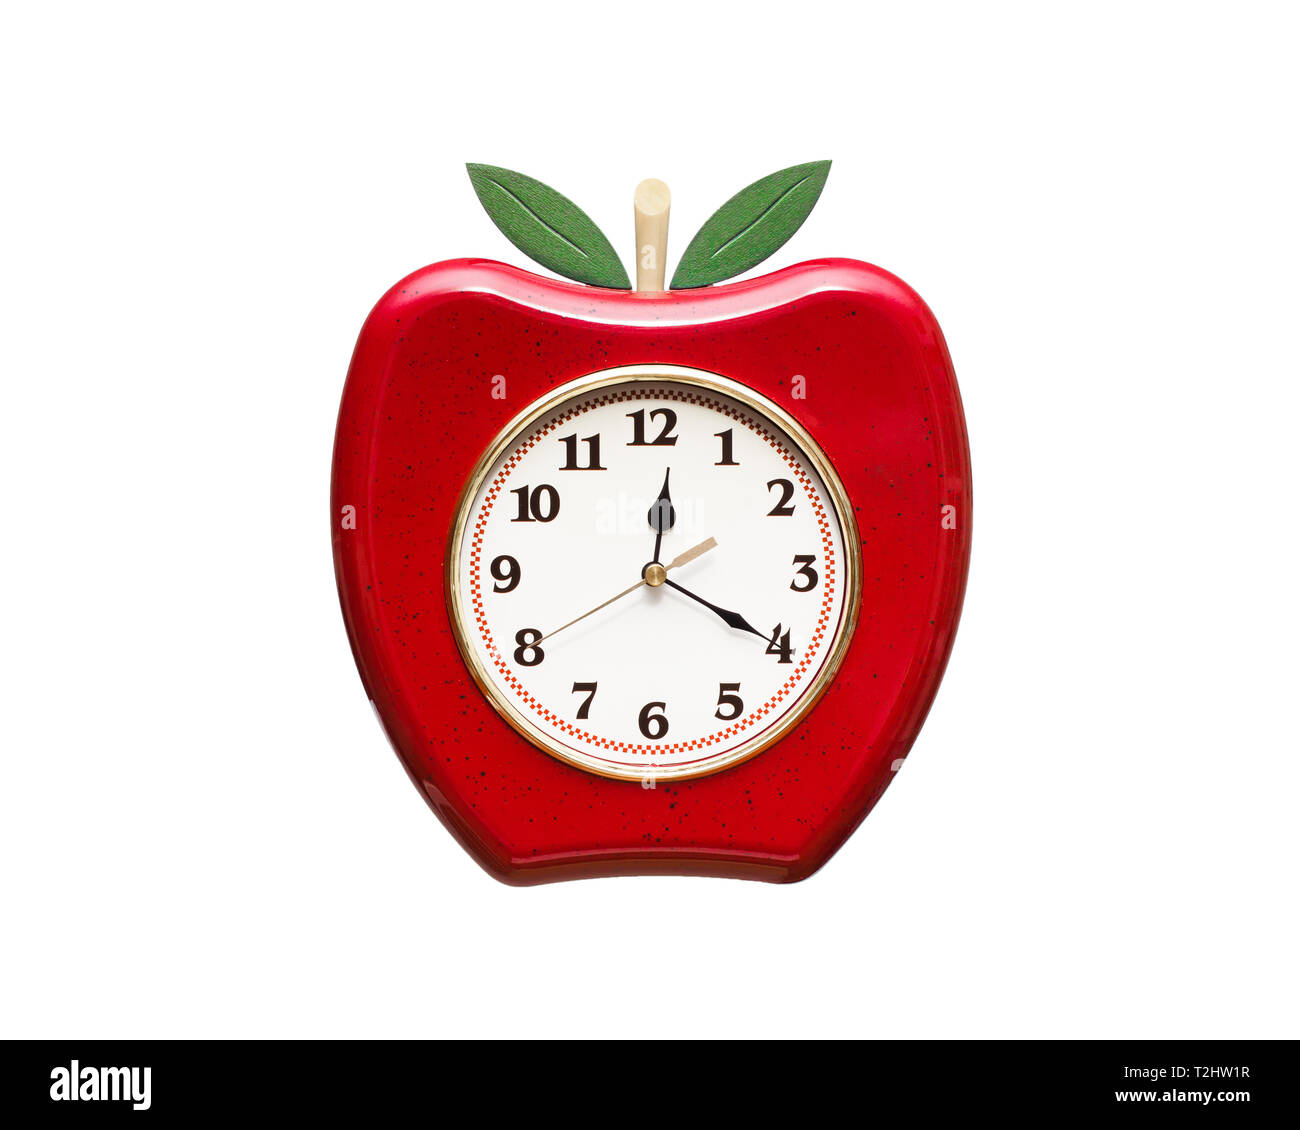 Cute red clock in shape of apple isolated on white Stock Photo